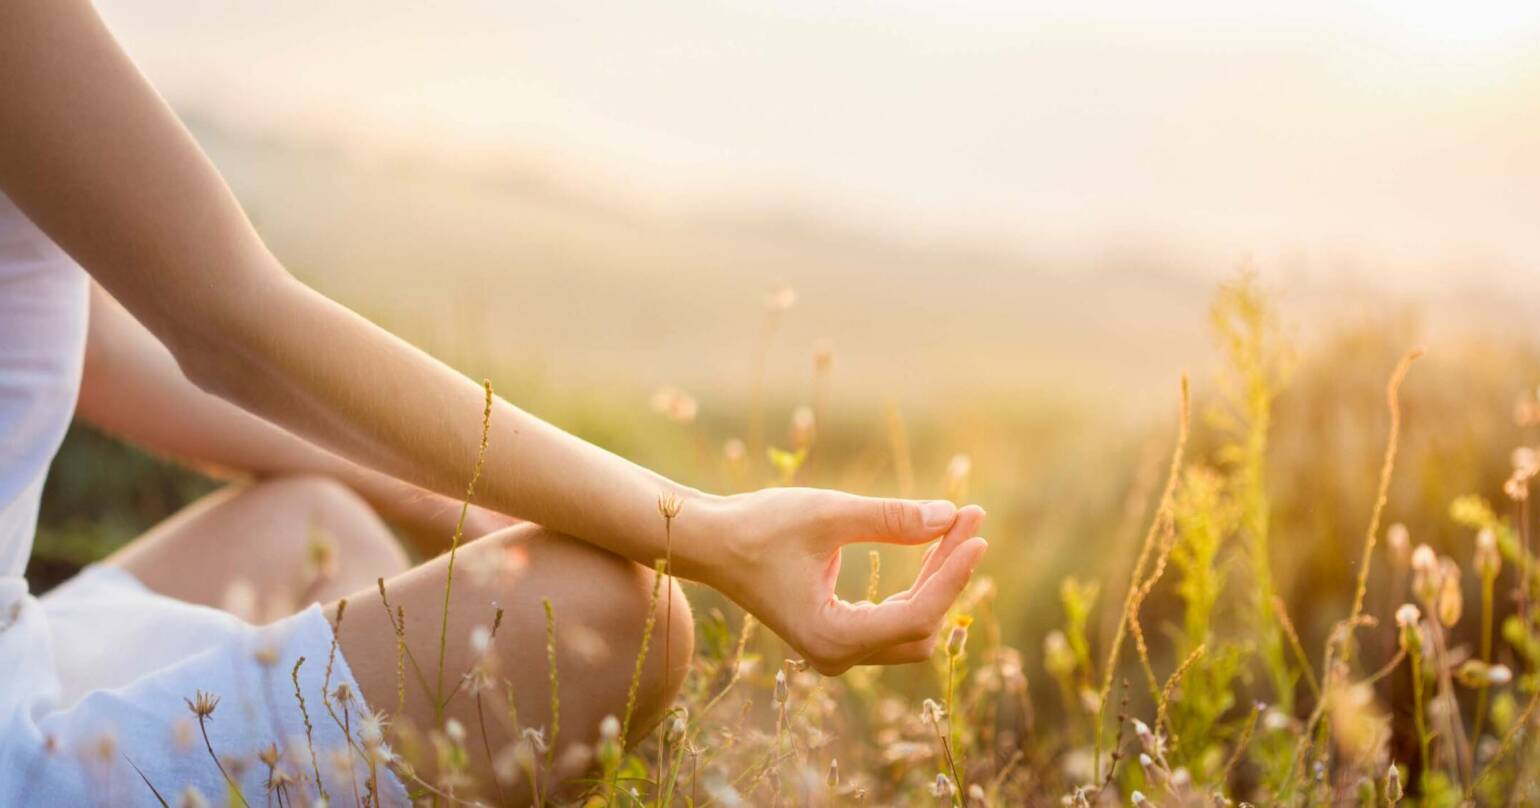 What is Mindfulness, really?